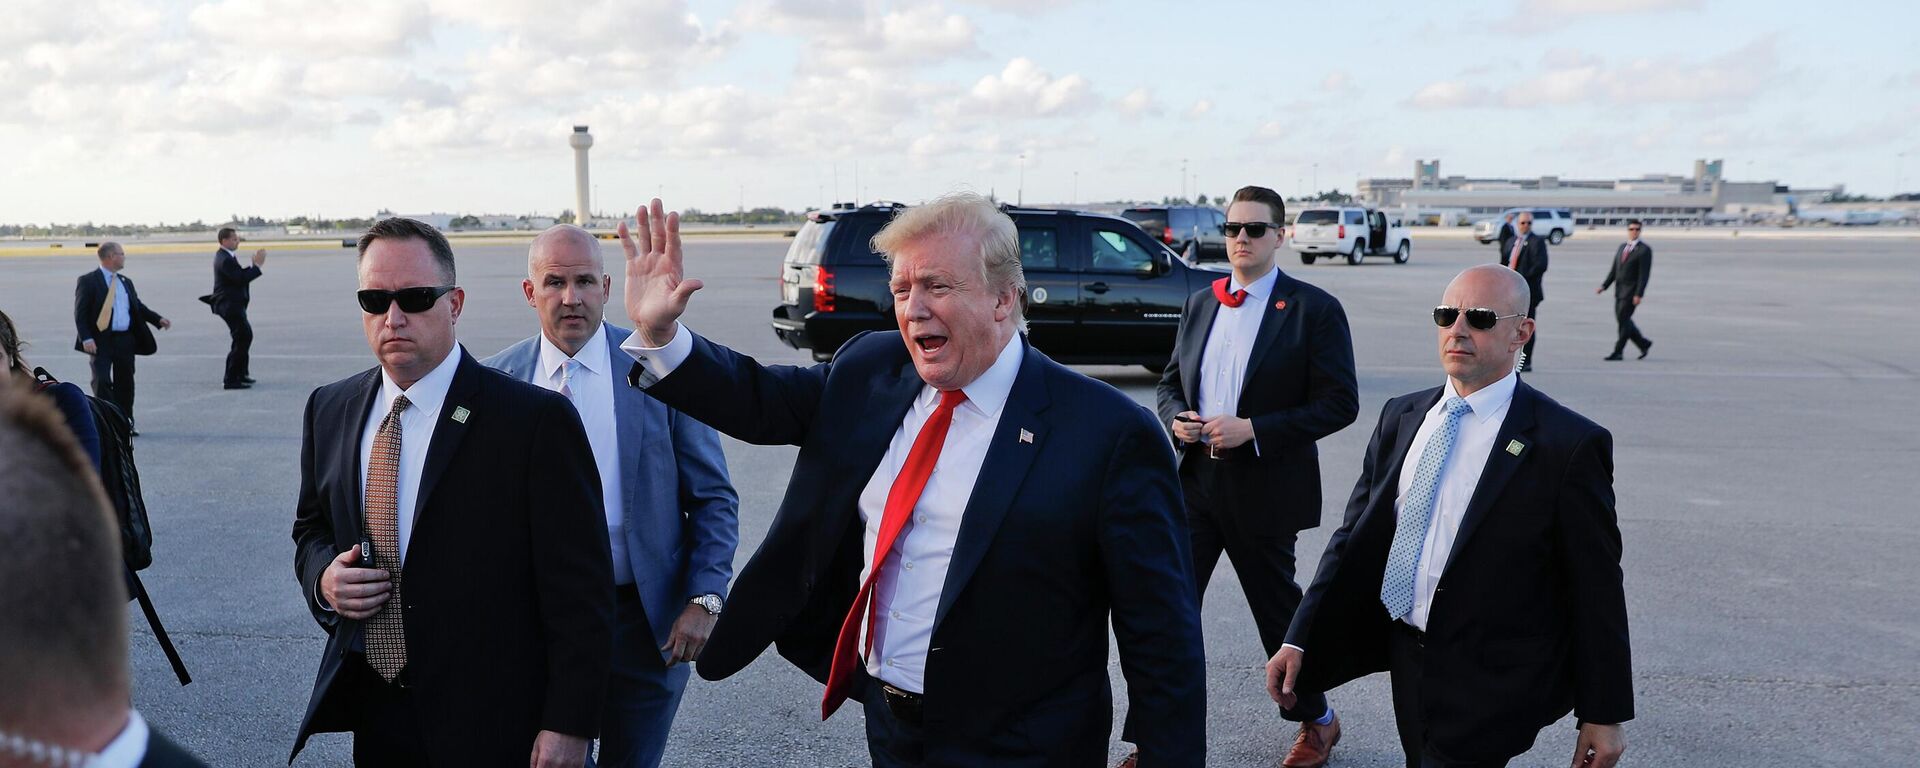 In this April 18, 2019, file photo, President Donald Trump, center, surrounded by members of the Secret Service, walks across the tarmac to begin to greet supporters during his arrival at Palm Beach International Airport, in West Palm Beach, Fla. As the Russia investigation threatened to shadow Donald Trump’s presidency, he became increasingly concerned he would be seen as a cheater and a fraud.  - Sputnik International, 1920, 21.07.2022